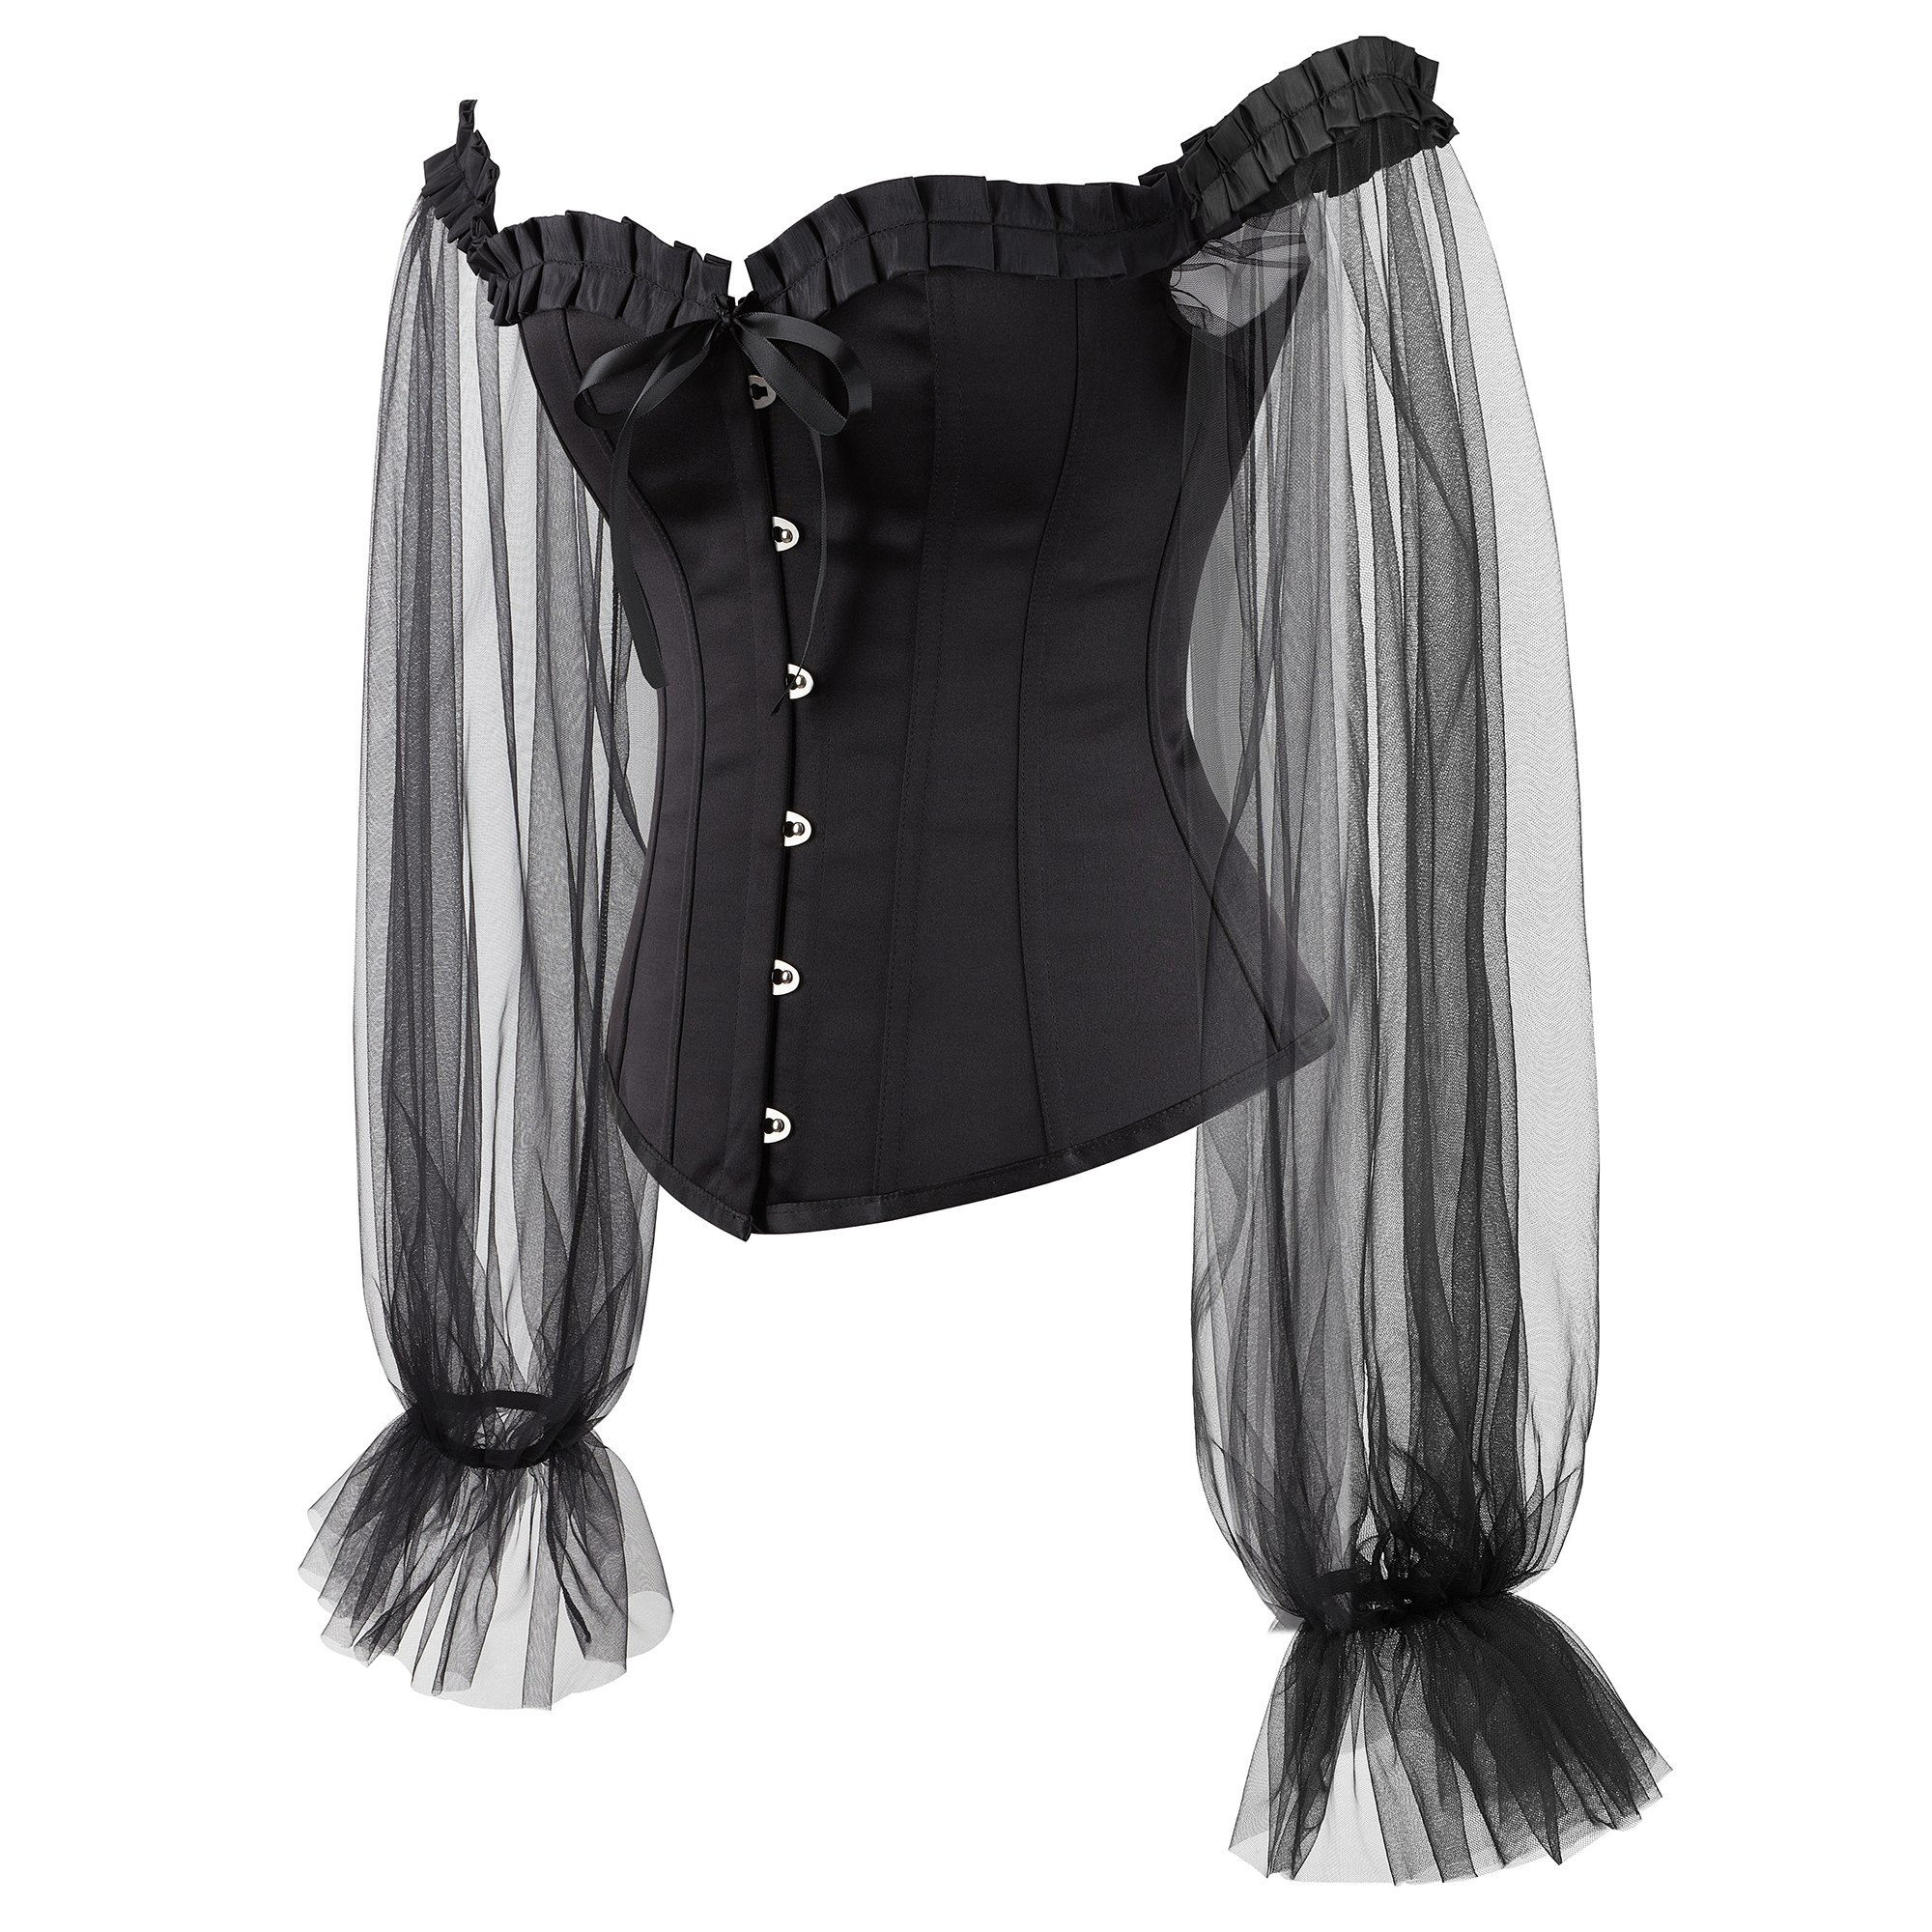 The set of black 3 best sellers corsets: waspie and black mesh